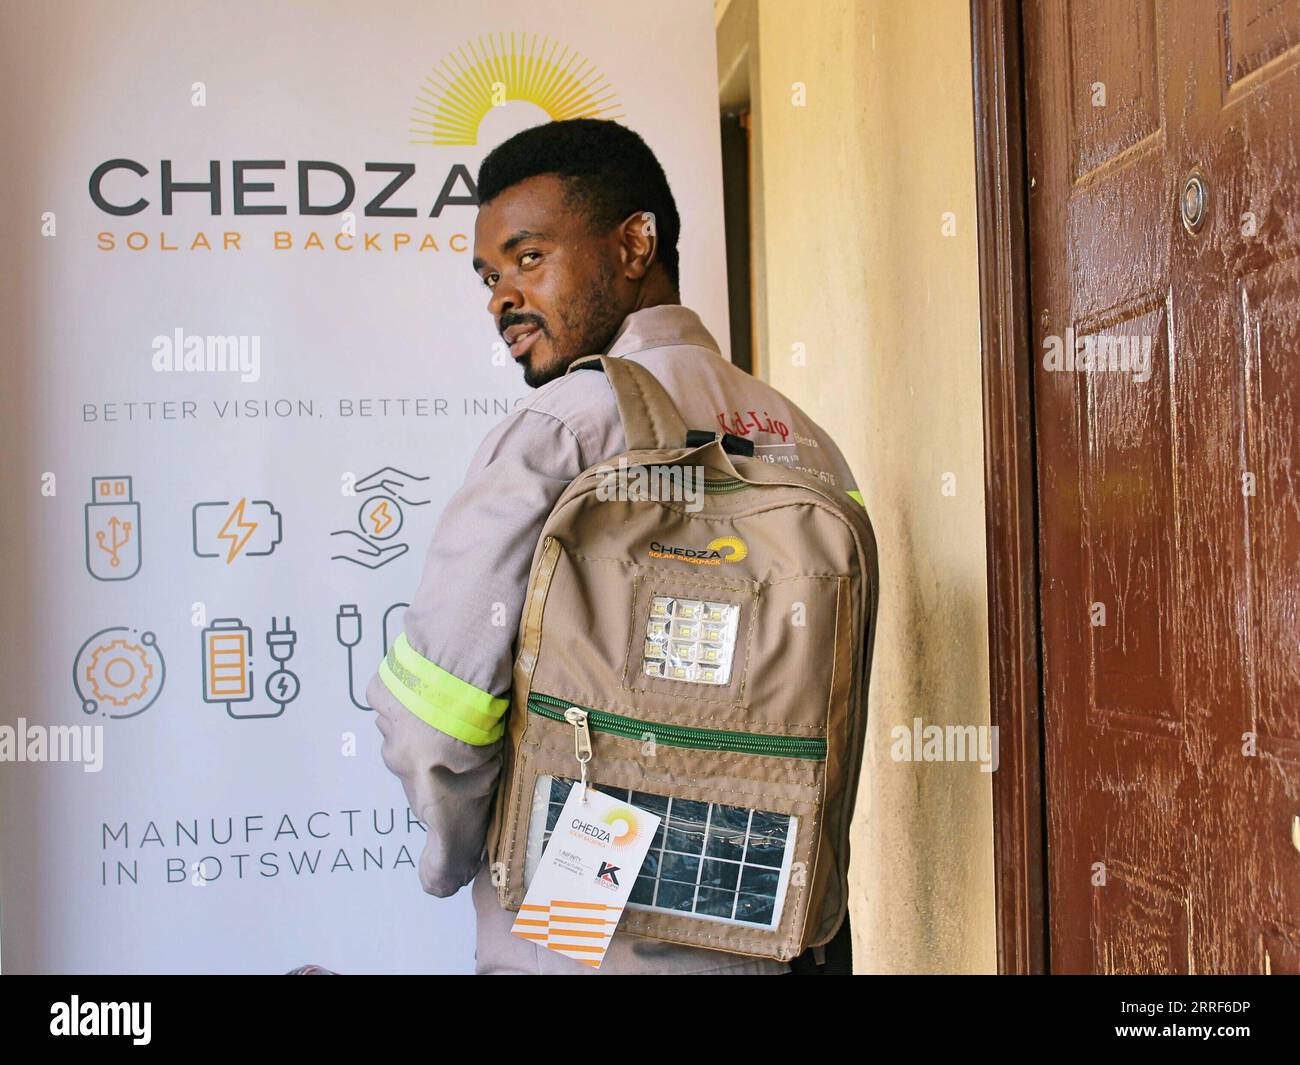 220331 -- GABORONE, March 31, 2022 -- Kedumetse Liphi, the 31-year-old innovative creator of Chedza Solar Backpacks, shows a solar backpack in Gaborone, Botswana, on March 21, 2022. In the first week of April, disadvantaged children in Botswana villages such as Tshono, Mokhomba, Lefoko and Sevrelela will receive Chedza Solar Backpacks that will enable them to study at night. Photo by /Xinhua TO GO WITH Feature: Solar backpacks aid students learning, clean energy uptake in Botswana BOTSWANA-GABORONE-SOLAR BACKPACKS SharonxTshipa PUBLICATIONxNOTxINxCHN Stock Photo